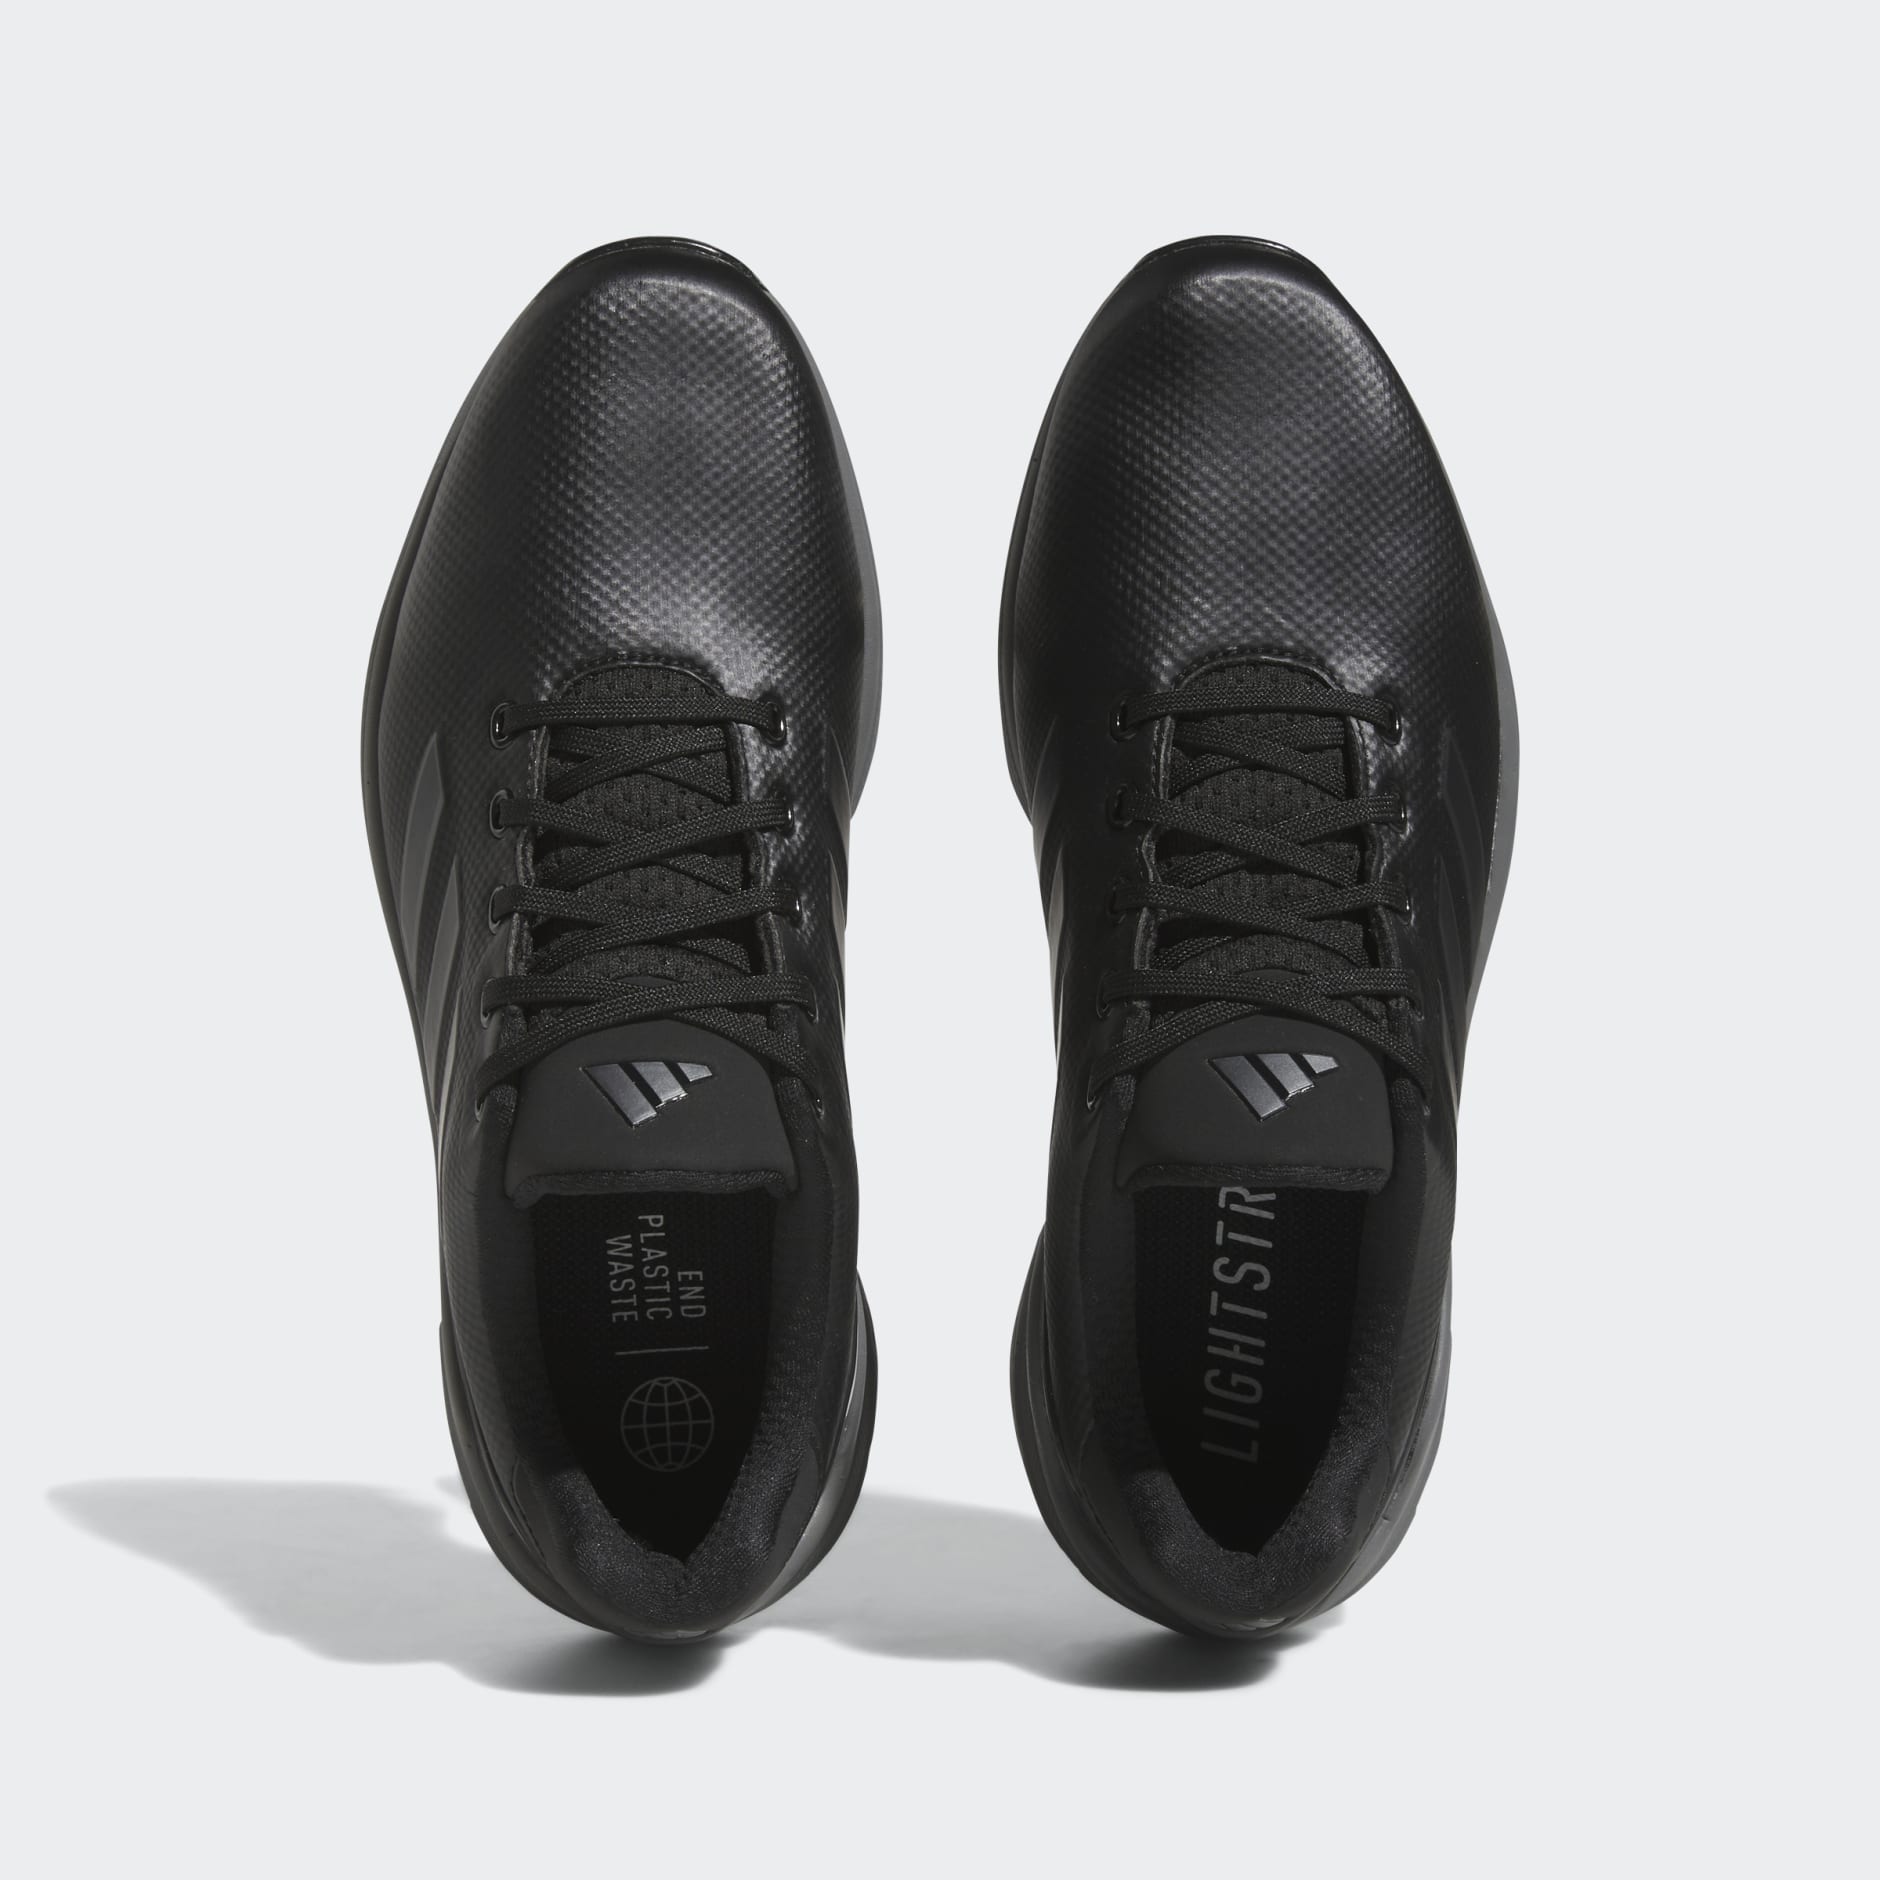 Shoes - ZG23 Golf Shoes - Black | adidas South Africa